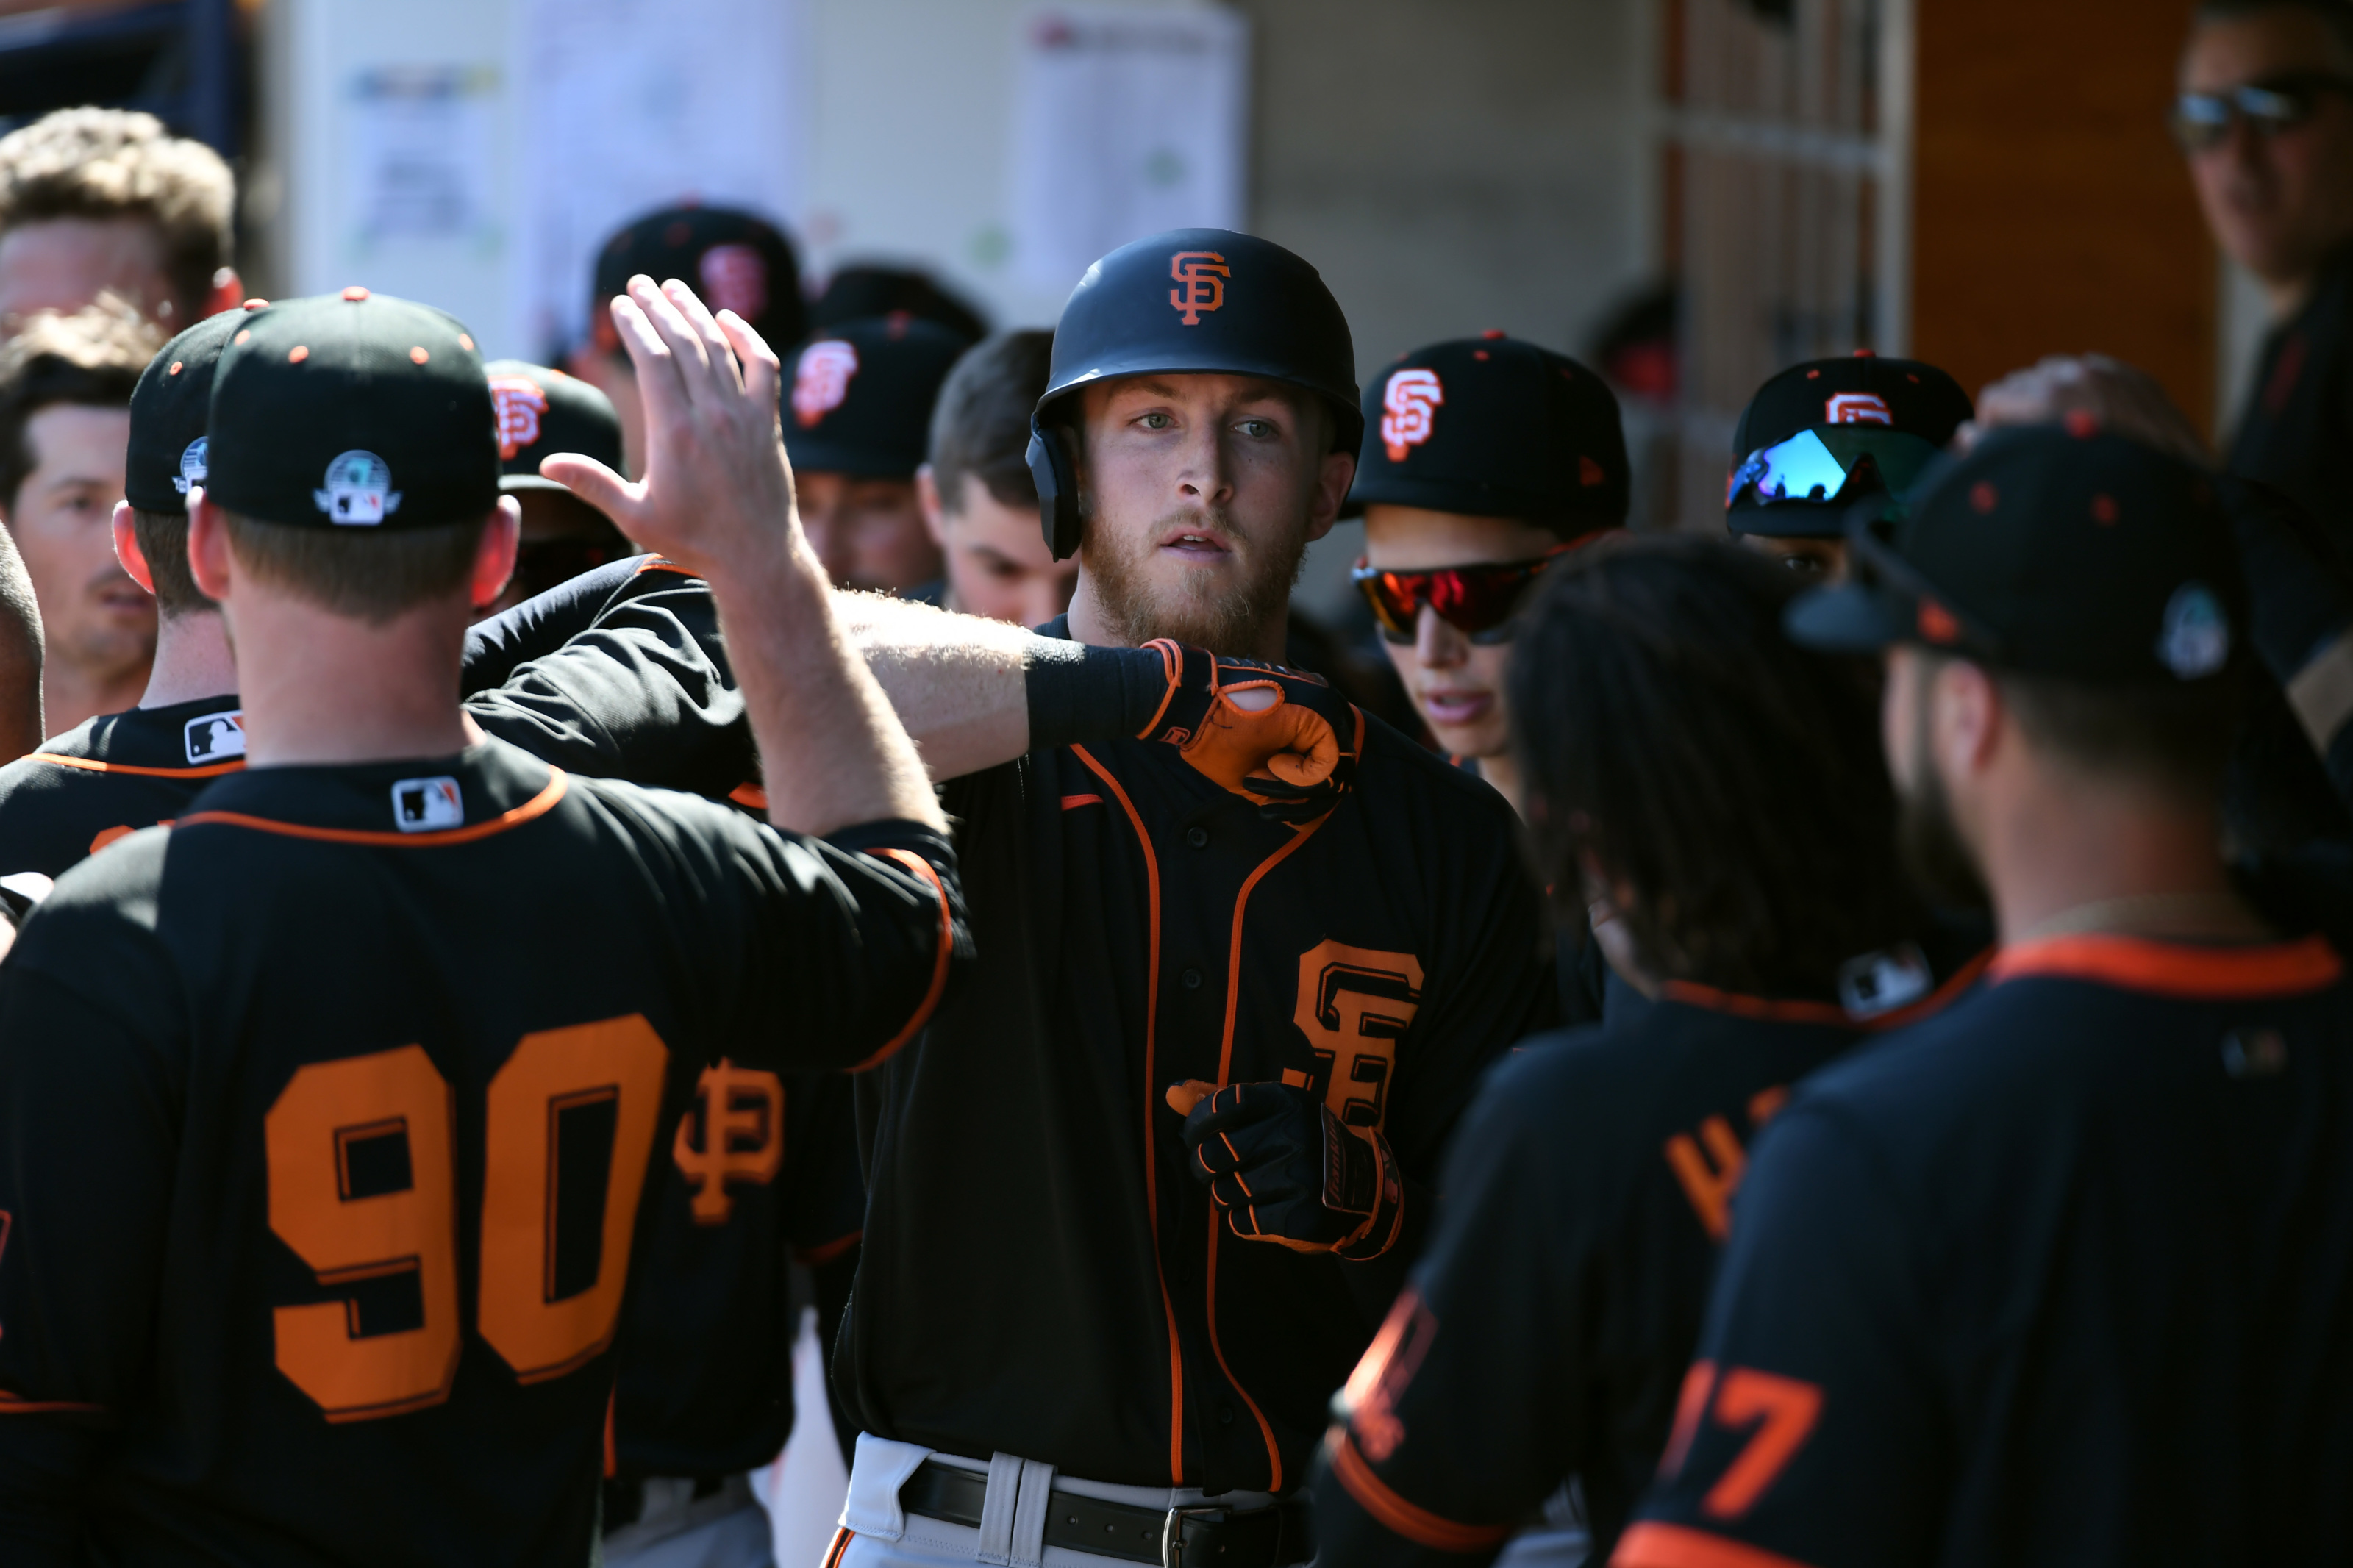 SF Giants Schedule: MLB releases times, dates for 2020 season